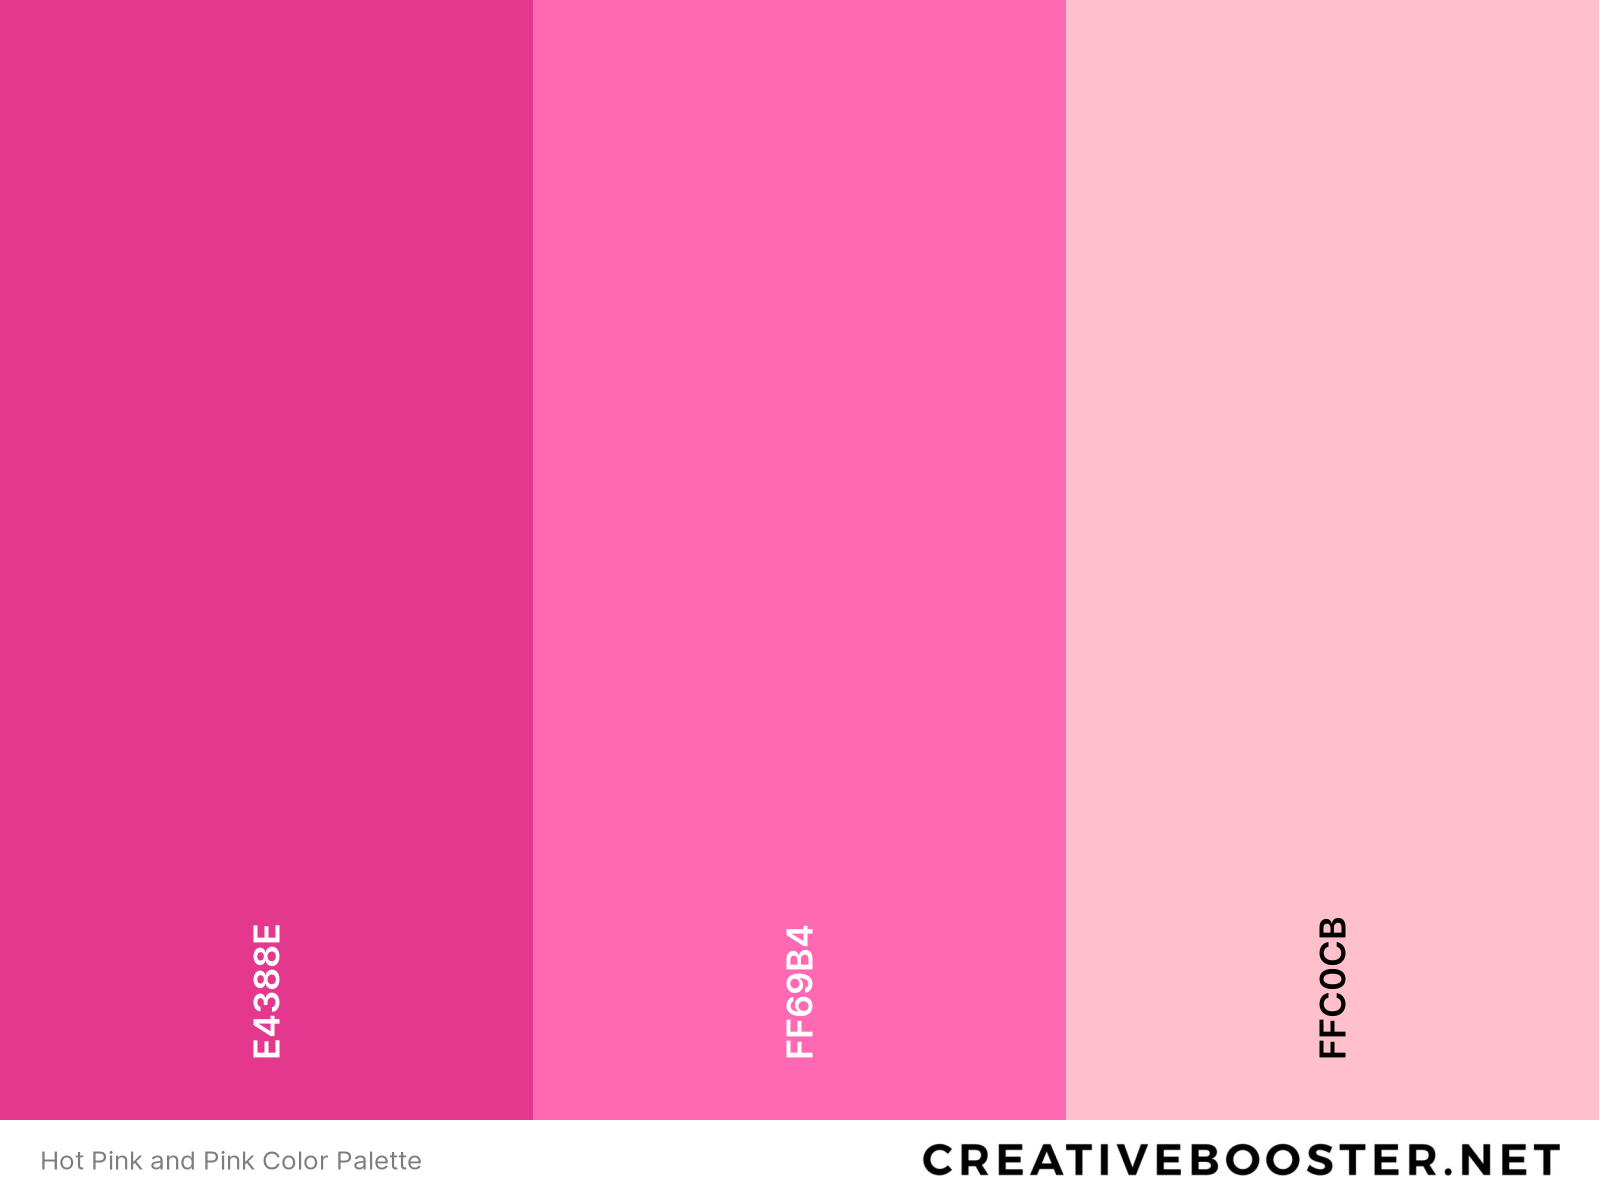 Hot Pink and Pink Color Palette